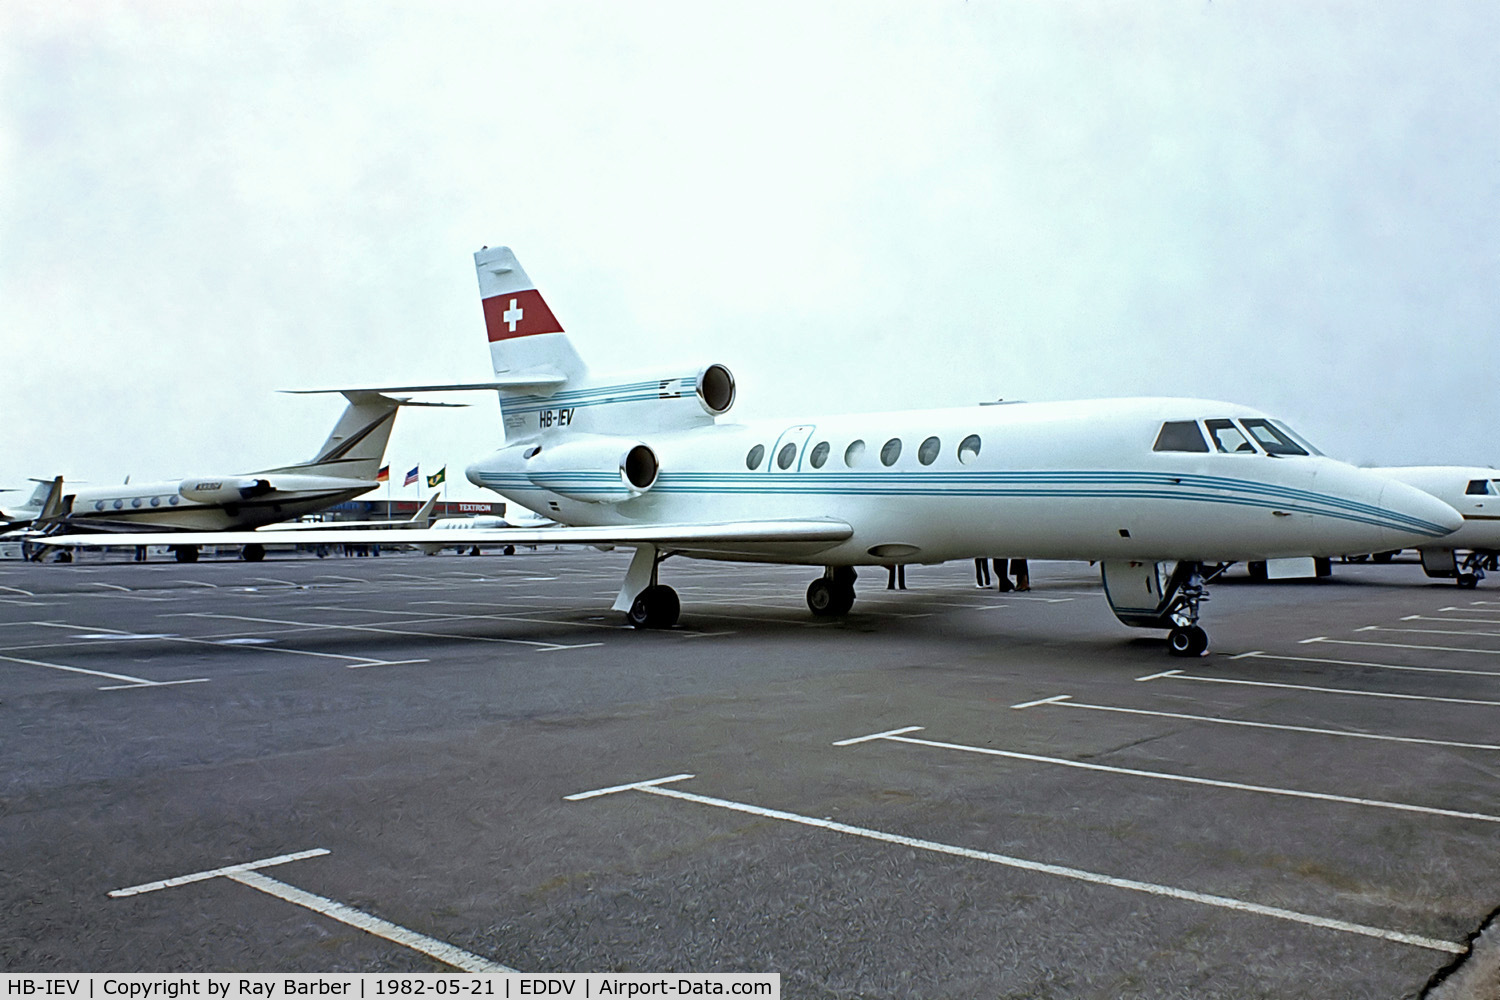 HB-IEV, 1981 Dassault Falcon 50 C/N 34, Dassault Falcon 50 [34] Hannover~D 21/05/1982. From a slide.